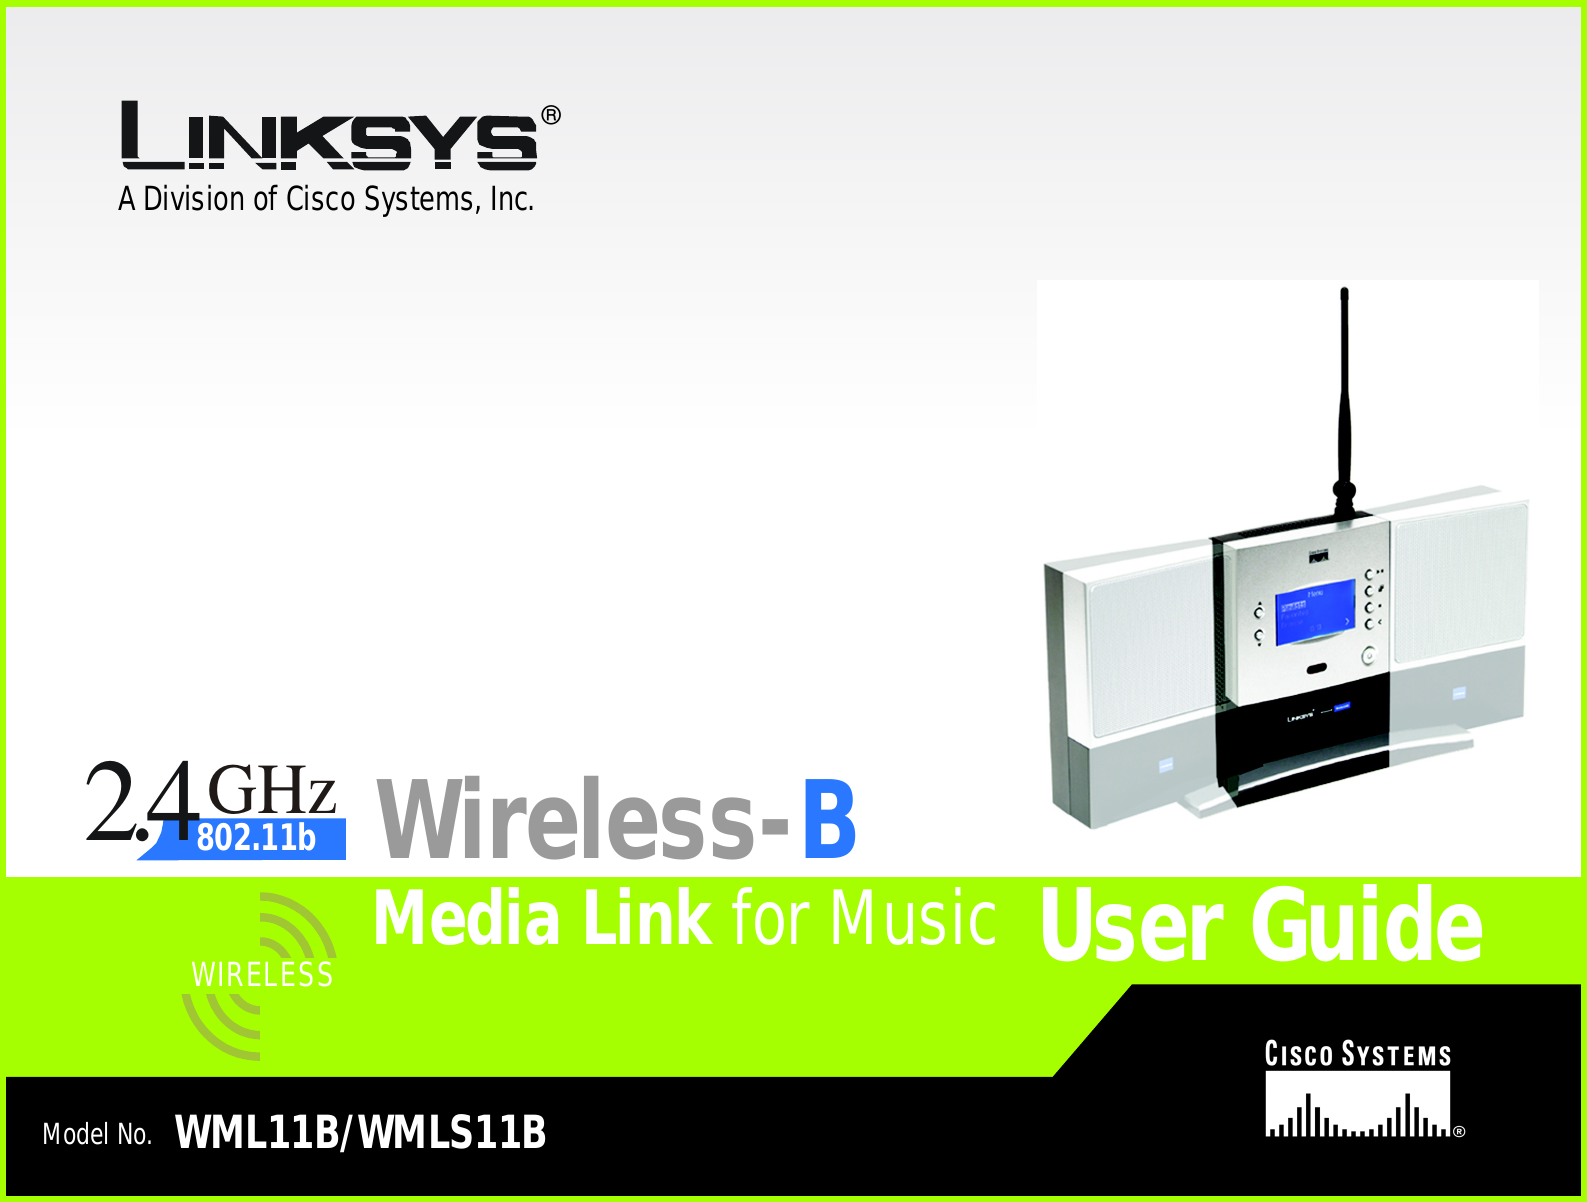 A Division of Cisco Systems, Inc.®Model No.Media Link for MusicWireless-BWML11B/WMLS11BUser GuideWIRELESSGHz2.4802.11b